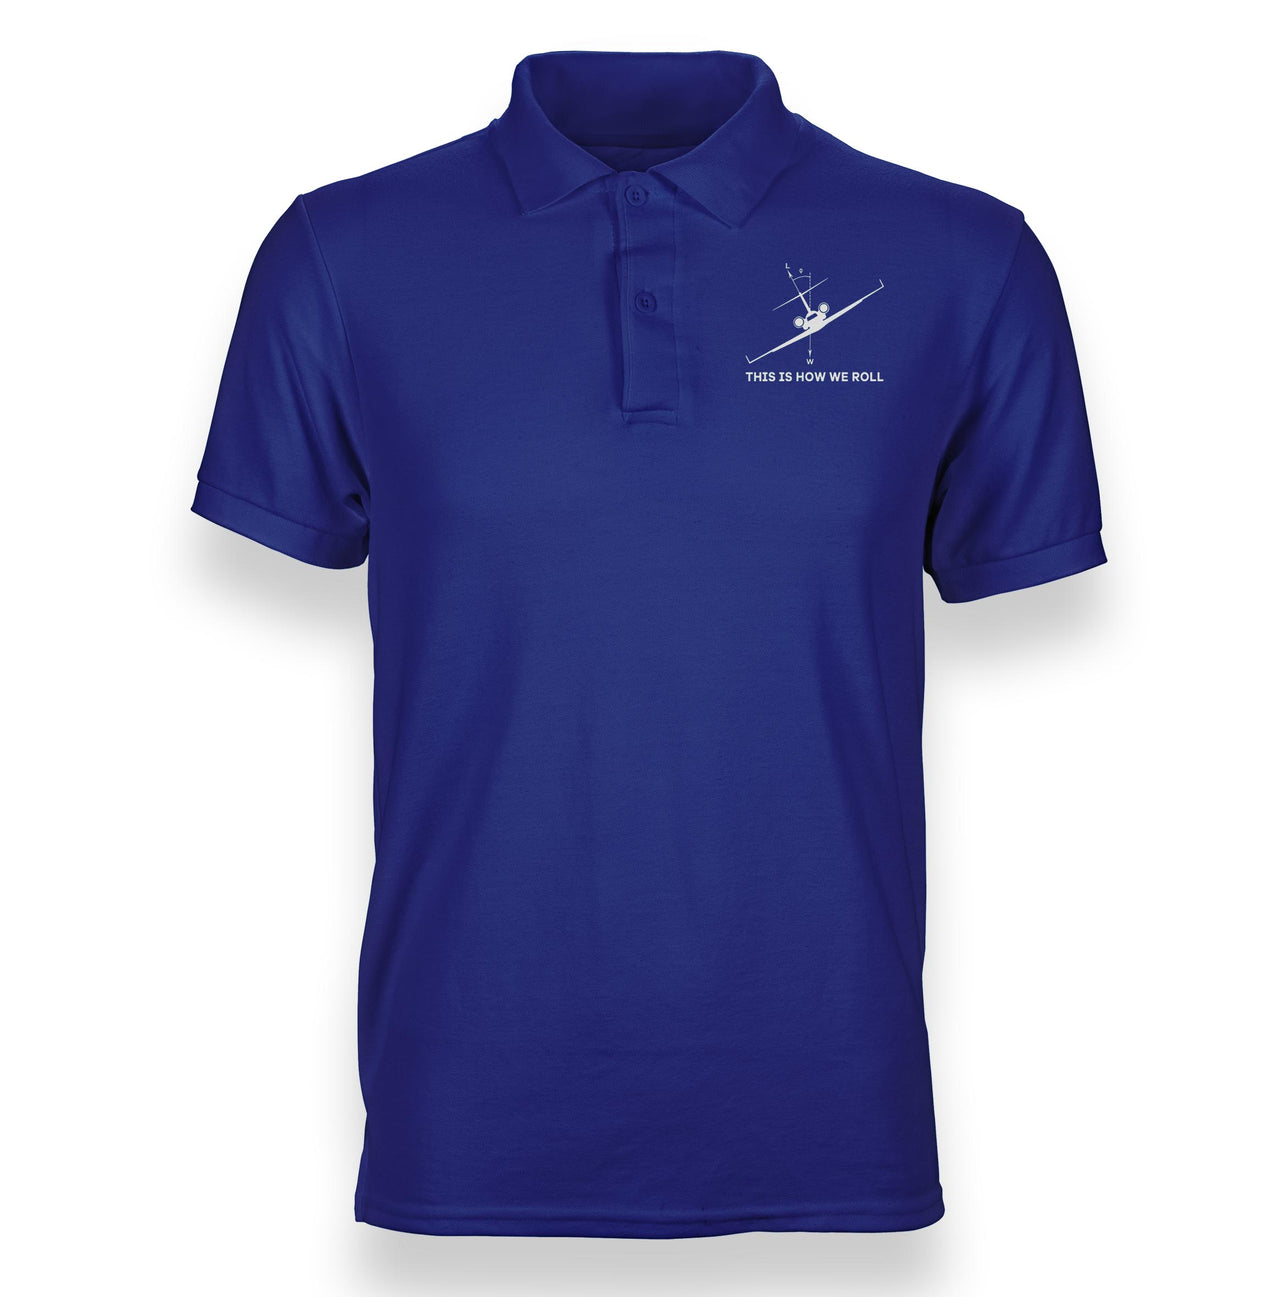 This is How We Roll Designed Polo T-Shirts